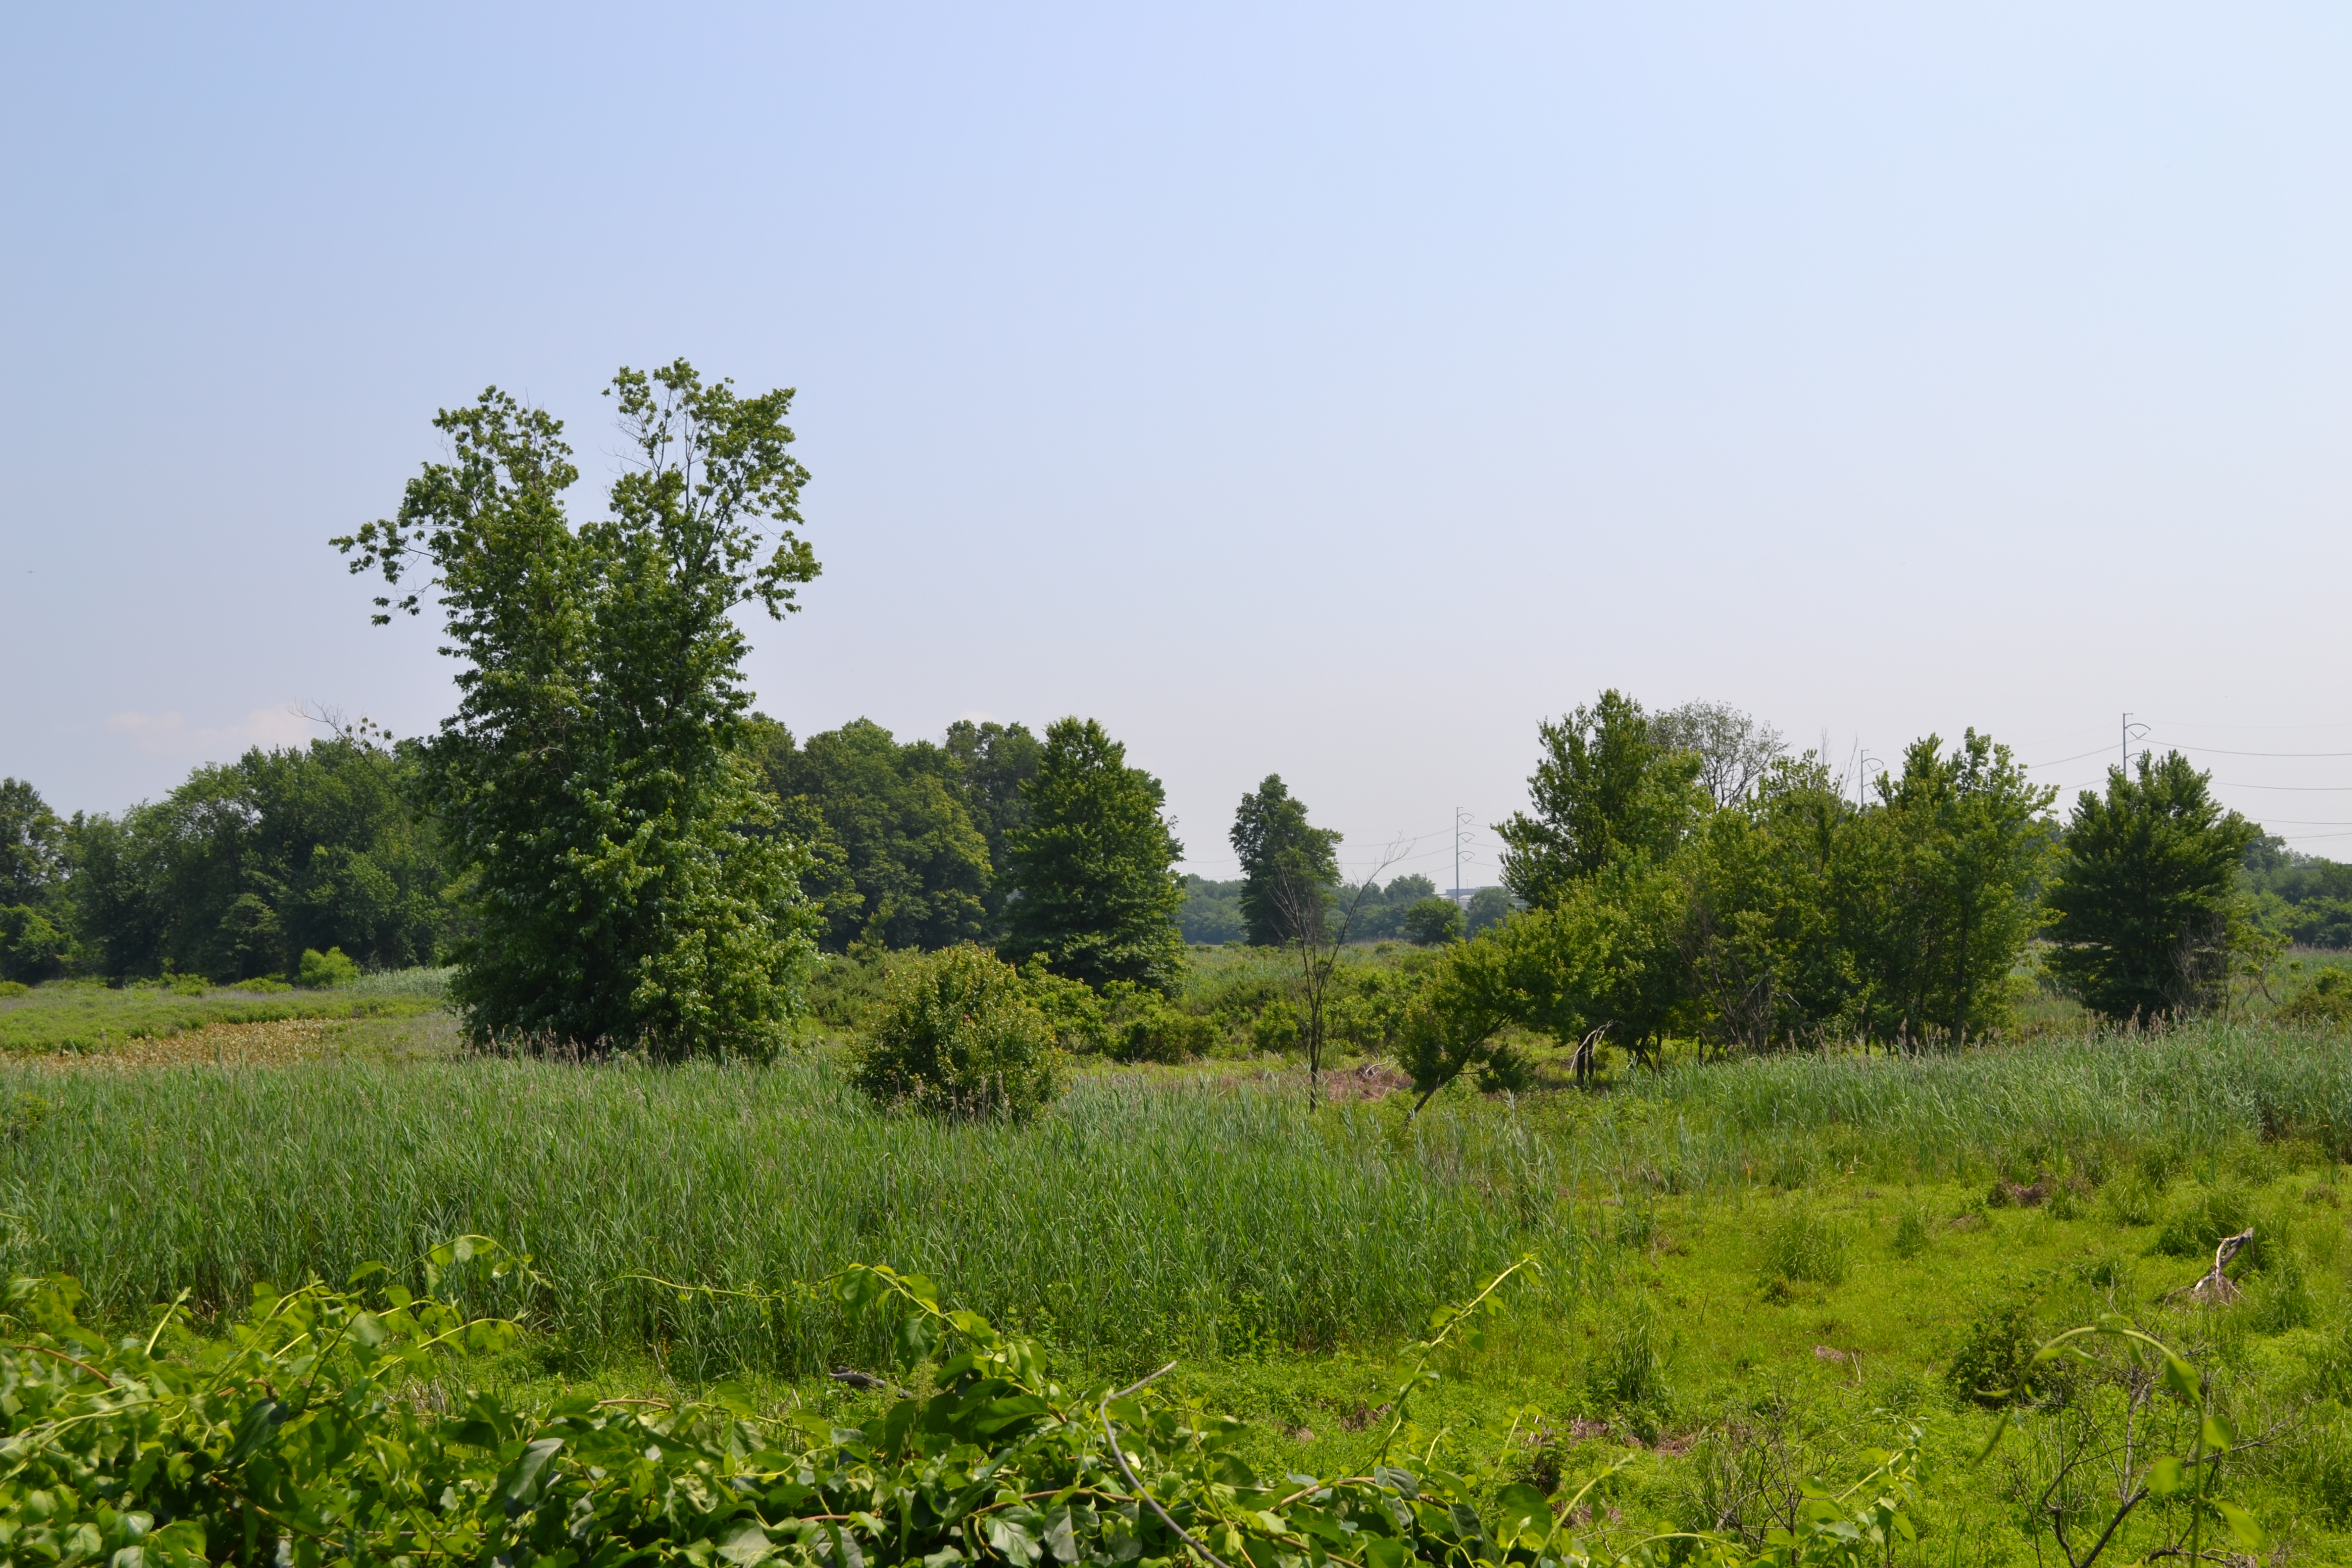 In total the refuge today is made of nearly 1,000 acres of woods, ponds, marsh and meadow